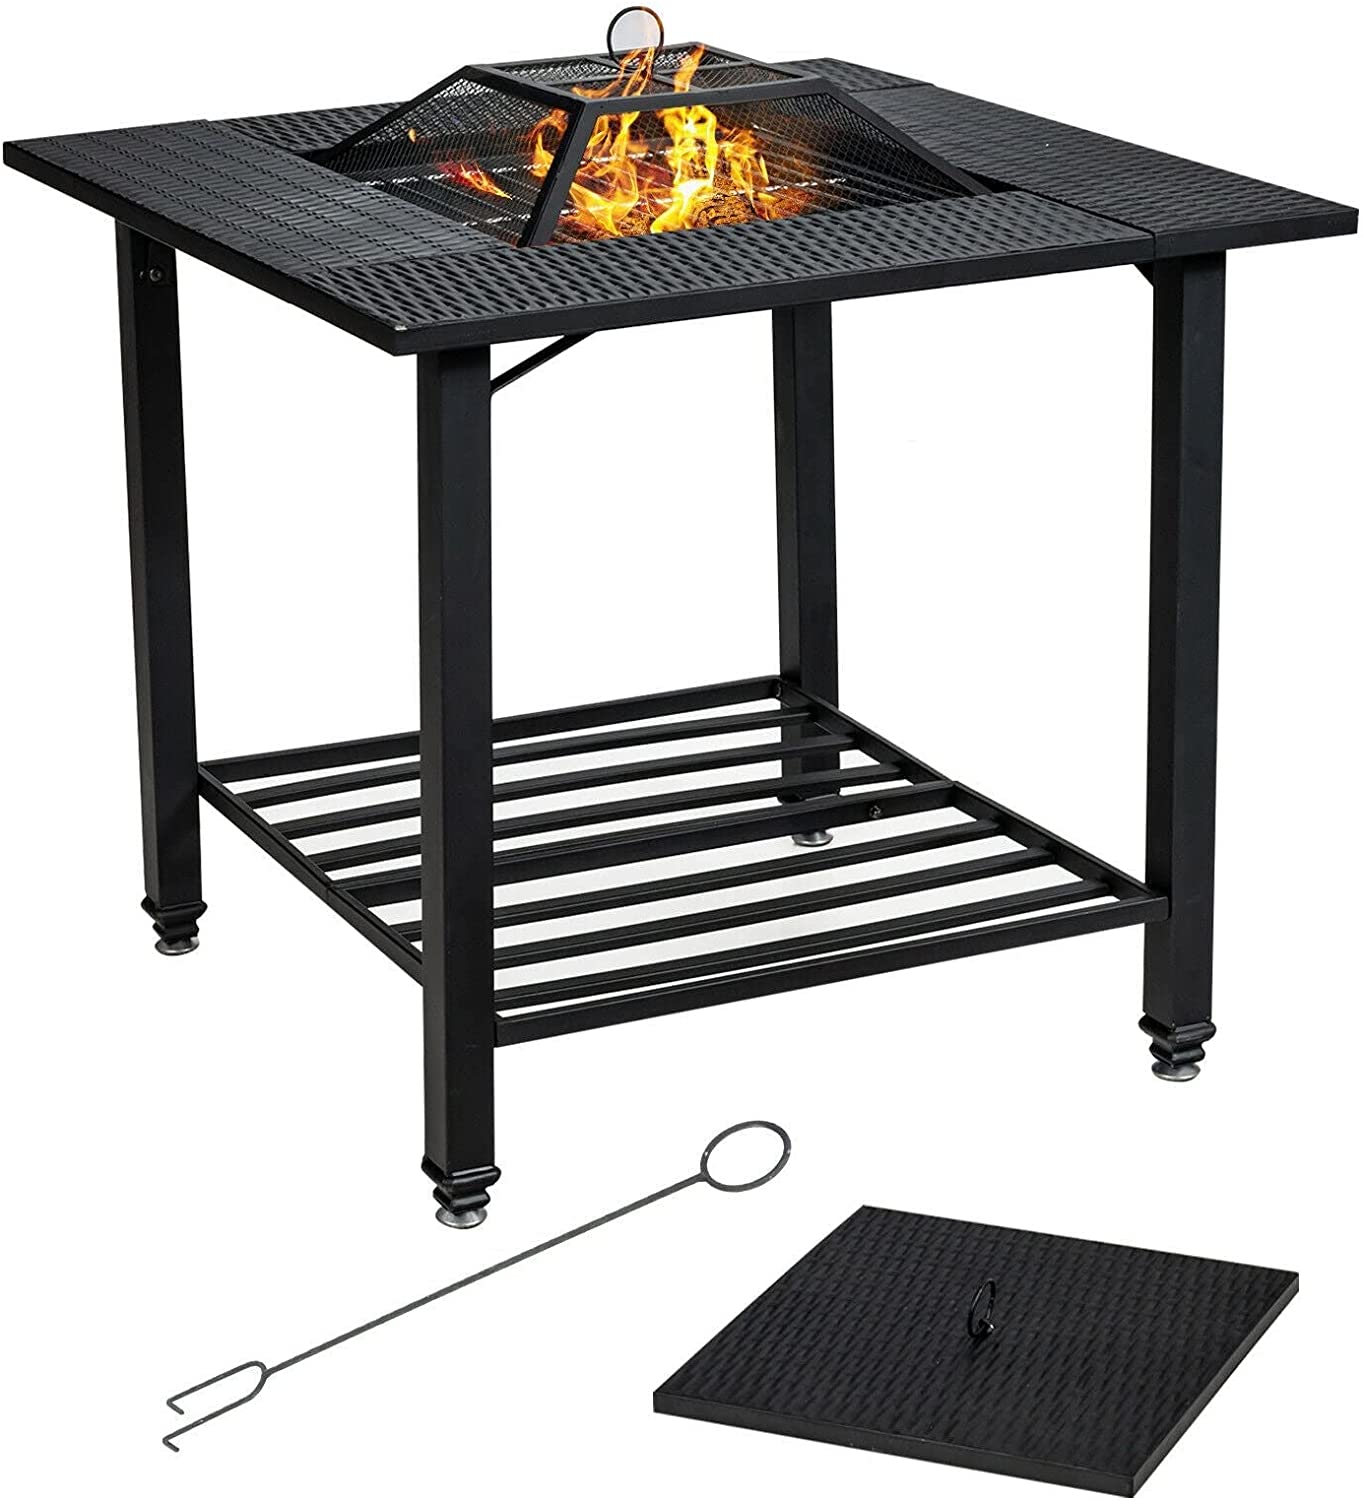 31 in. Metal Square Outdoor Fire Pit in Black with Cooking BBQ Grate